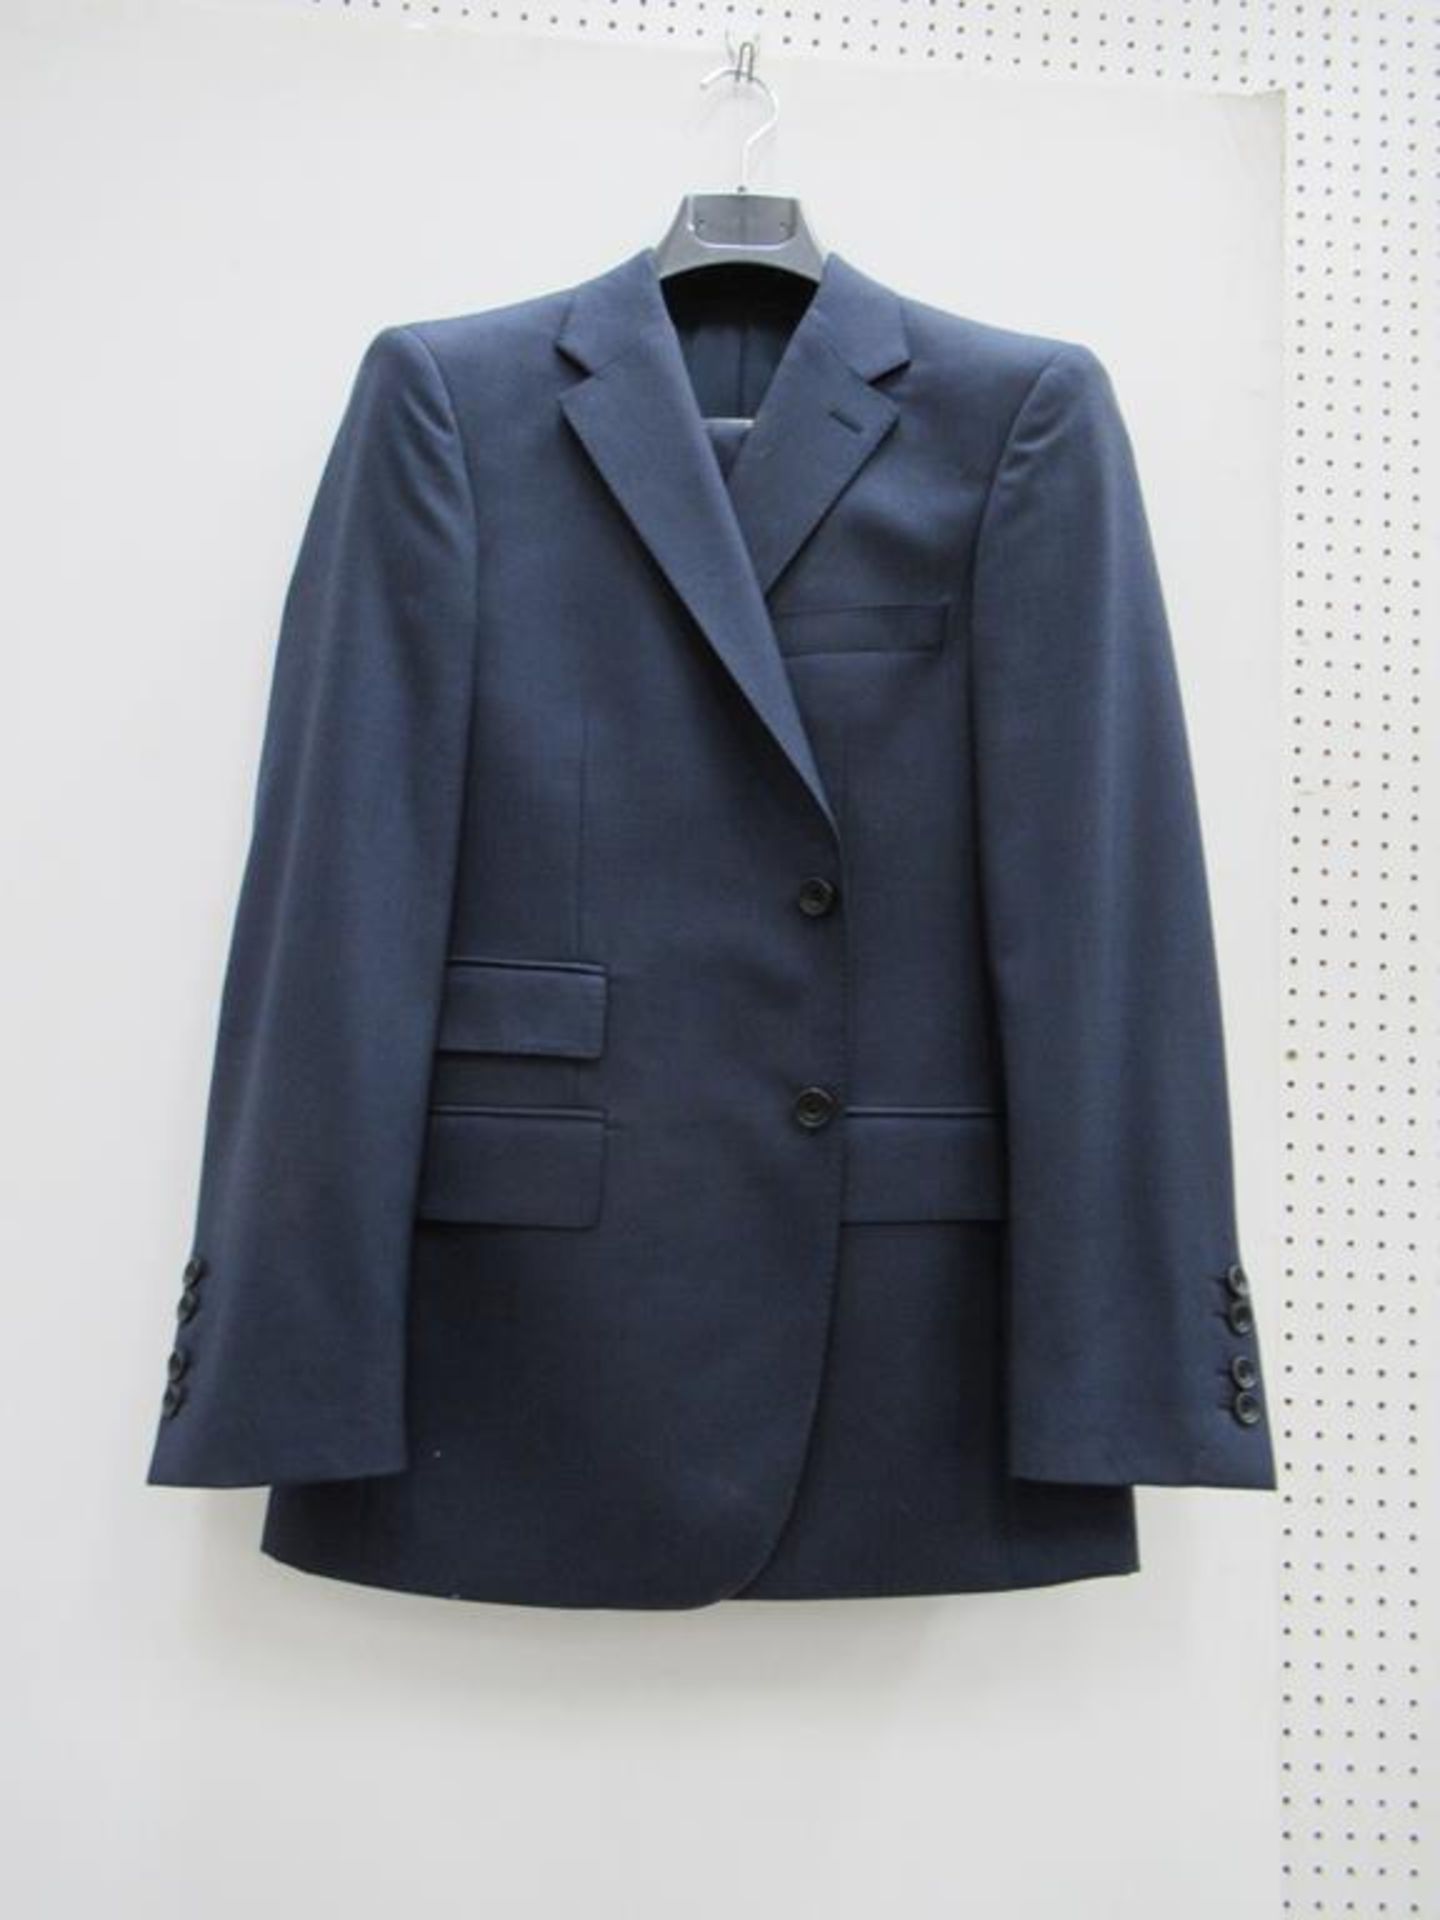 2 x Single breasted two piece suit